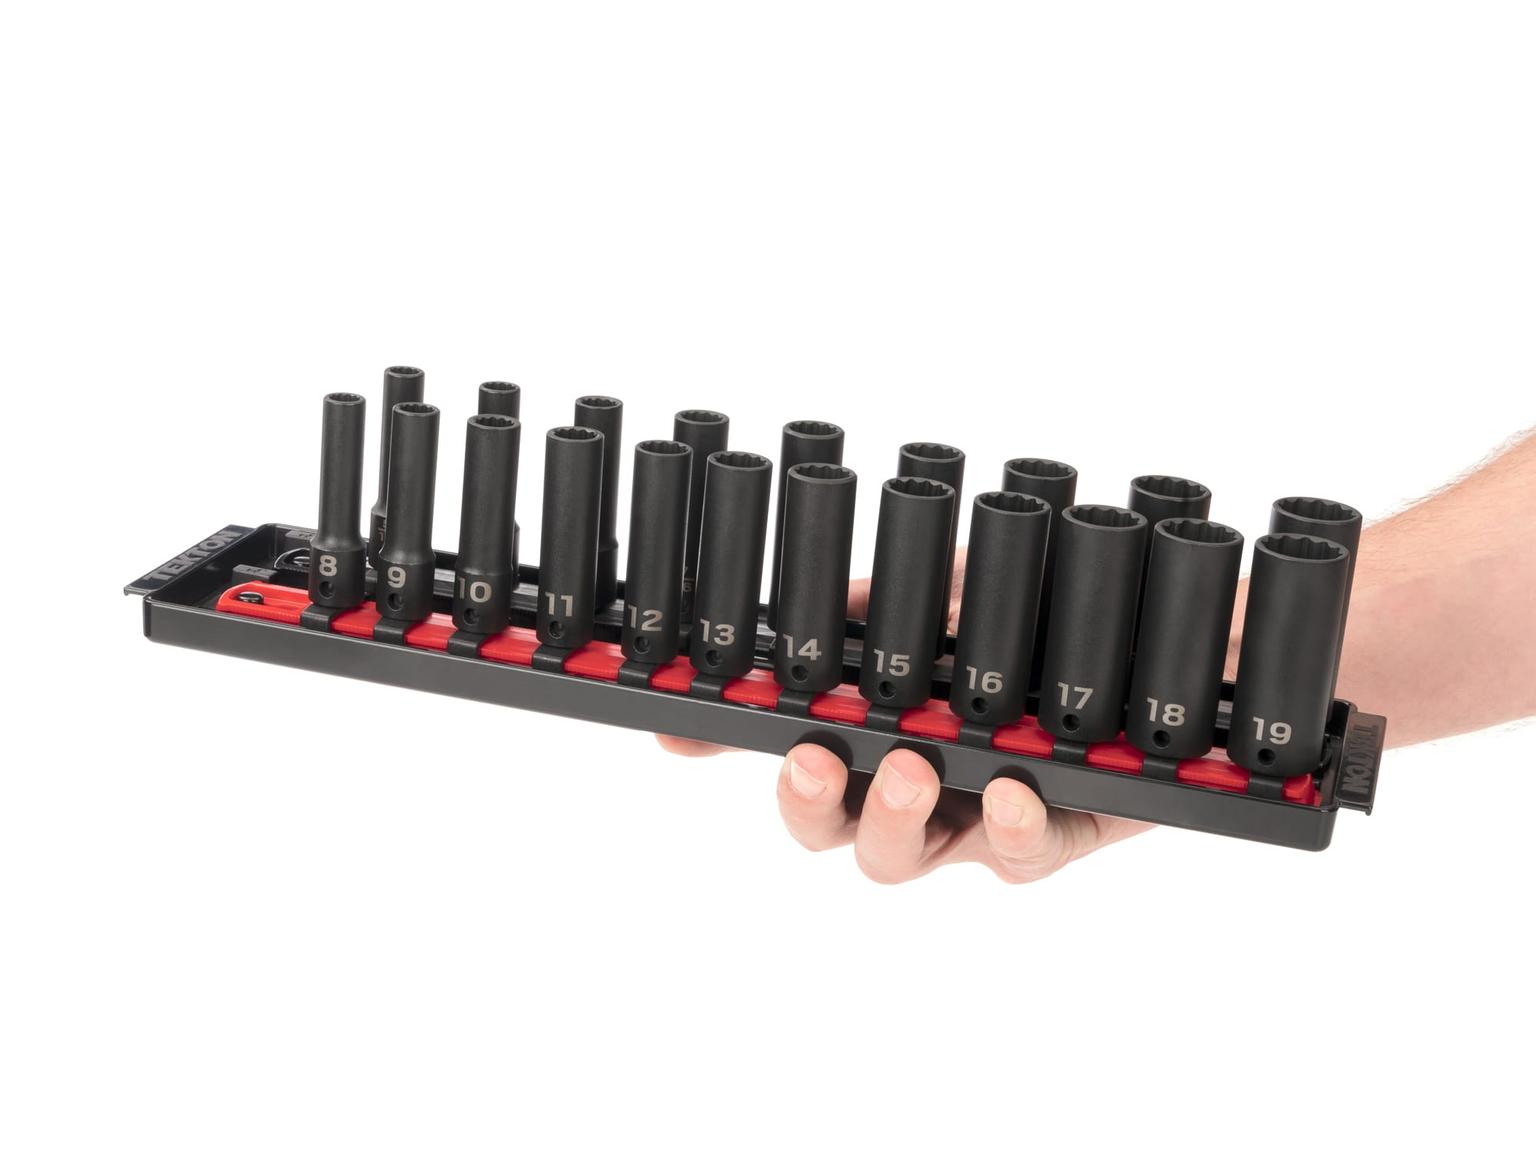 TEKTON SID91205-T 3/8 Inch Drive Deep 12-Point Impact Socket Set, 21-Piece (5/16-3/4 in., 8-19 mm) with Rails